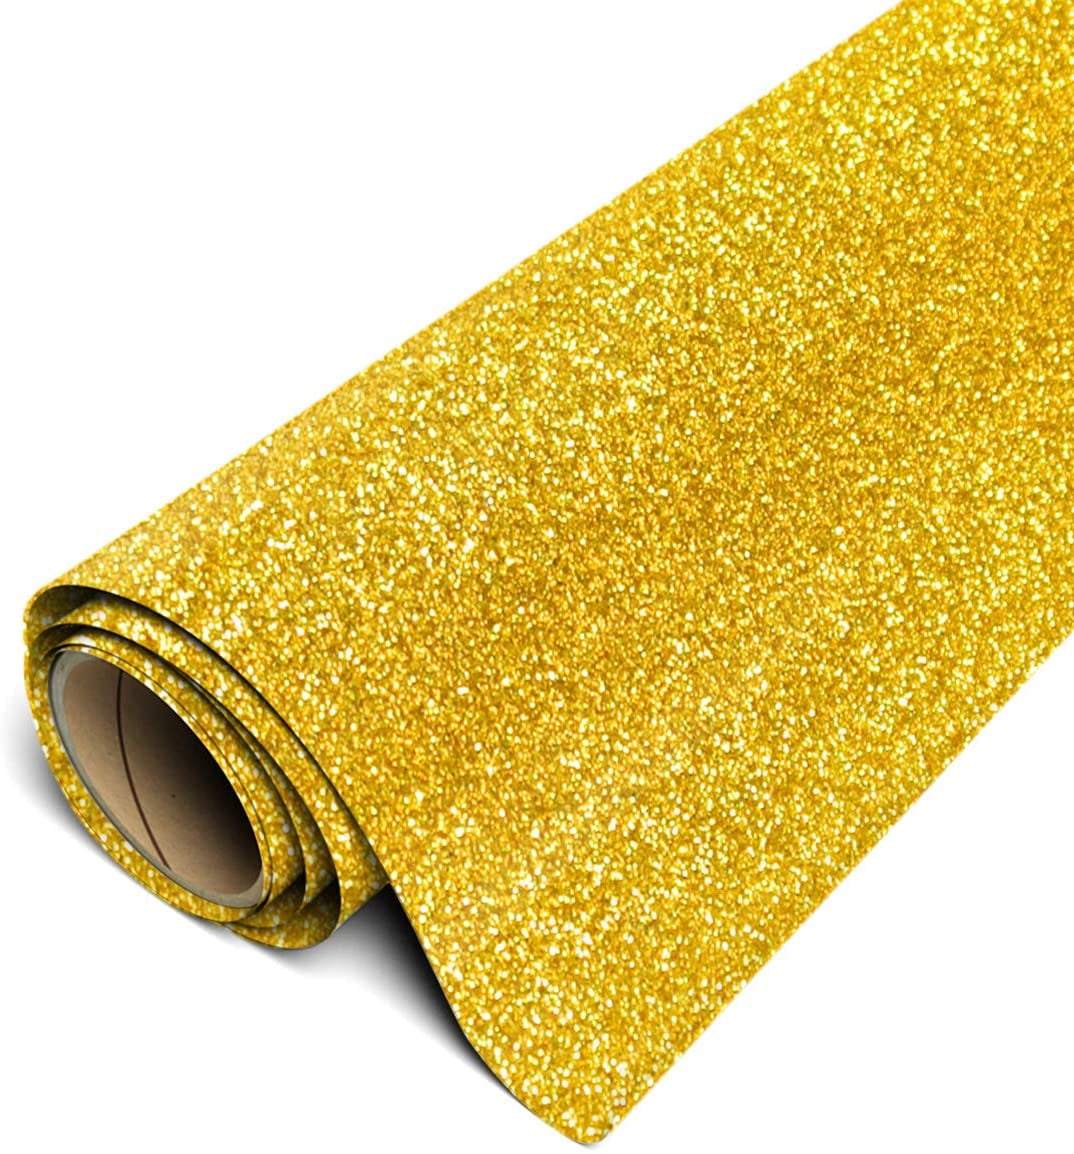 Glitter Heat Transfer Vinyl for T-Shirts 10 Inches by 10 Feet Glitter Roll  